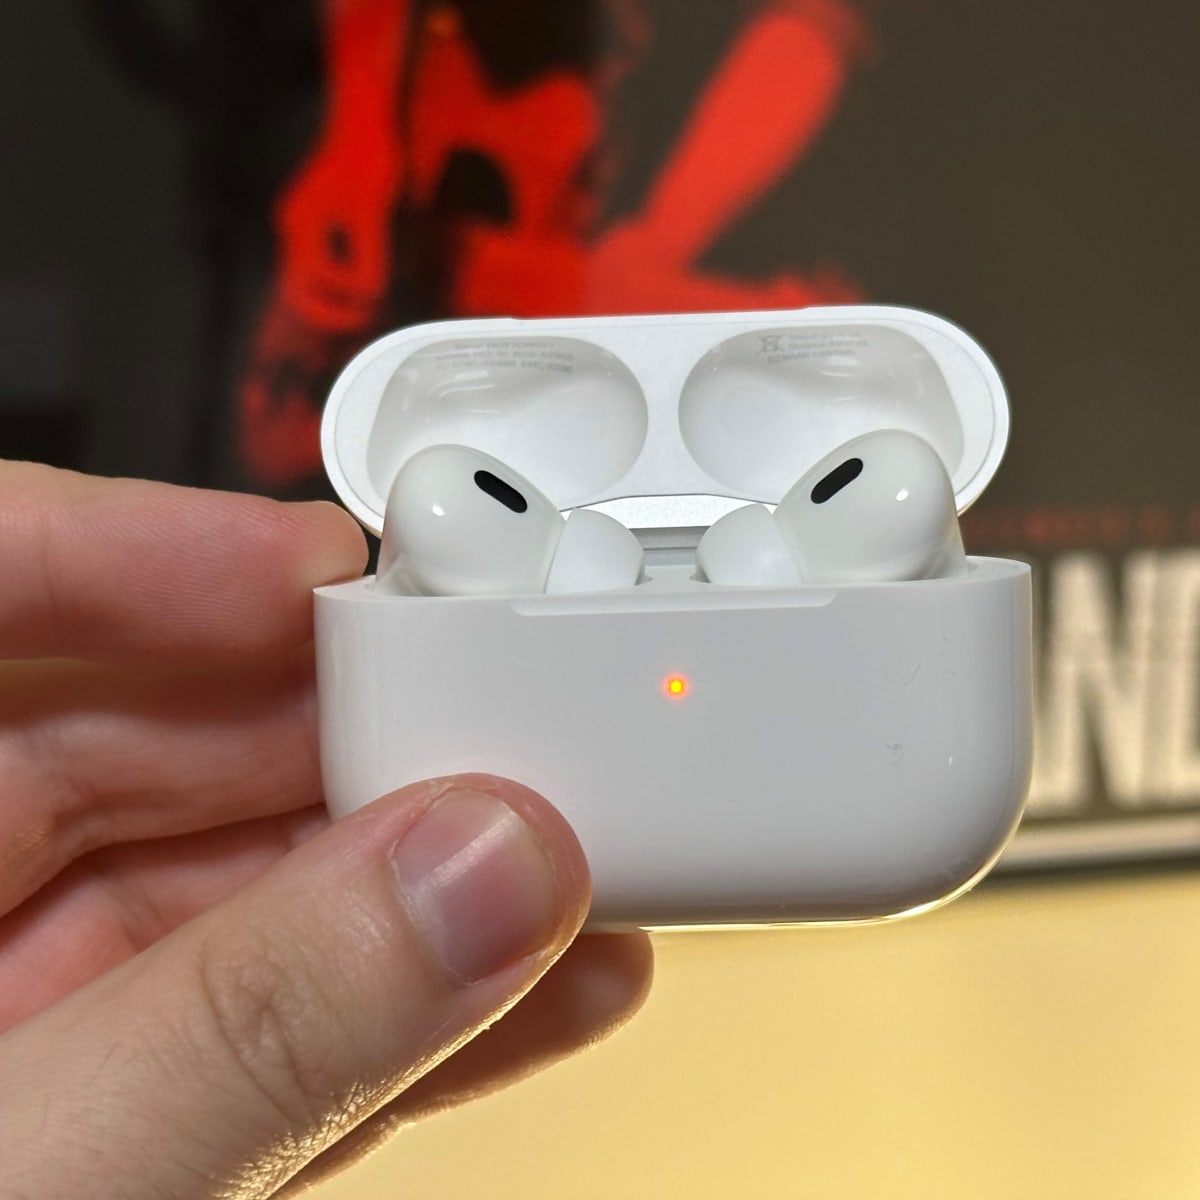 October Prime Day AirPod Deals: Get AirPods Pro for $189